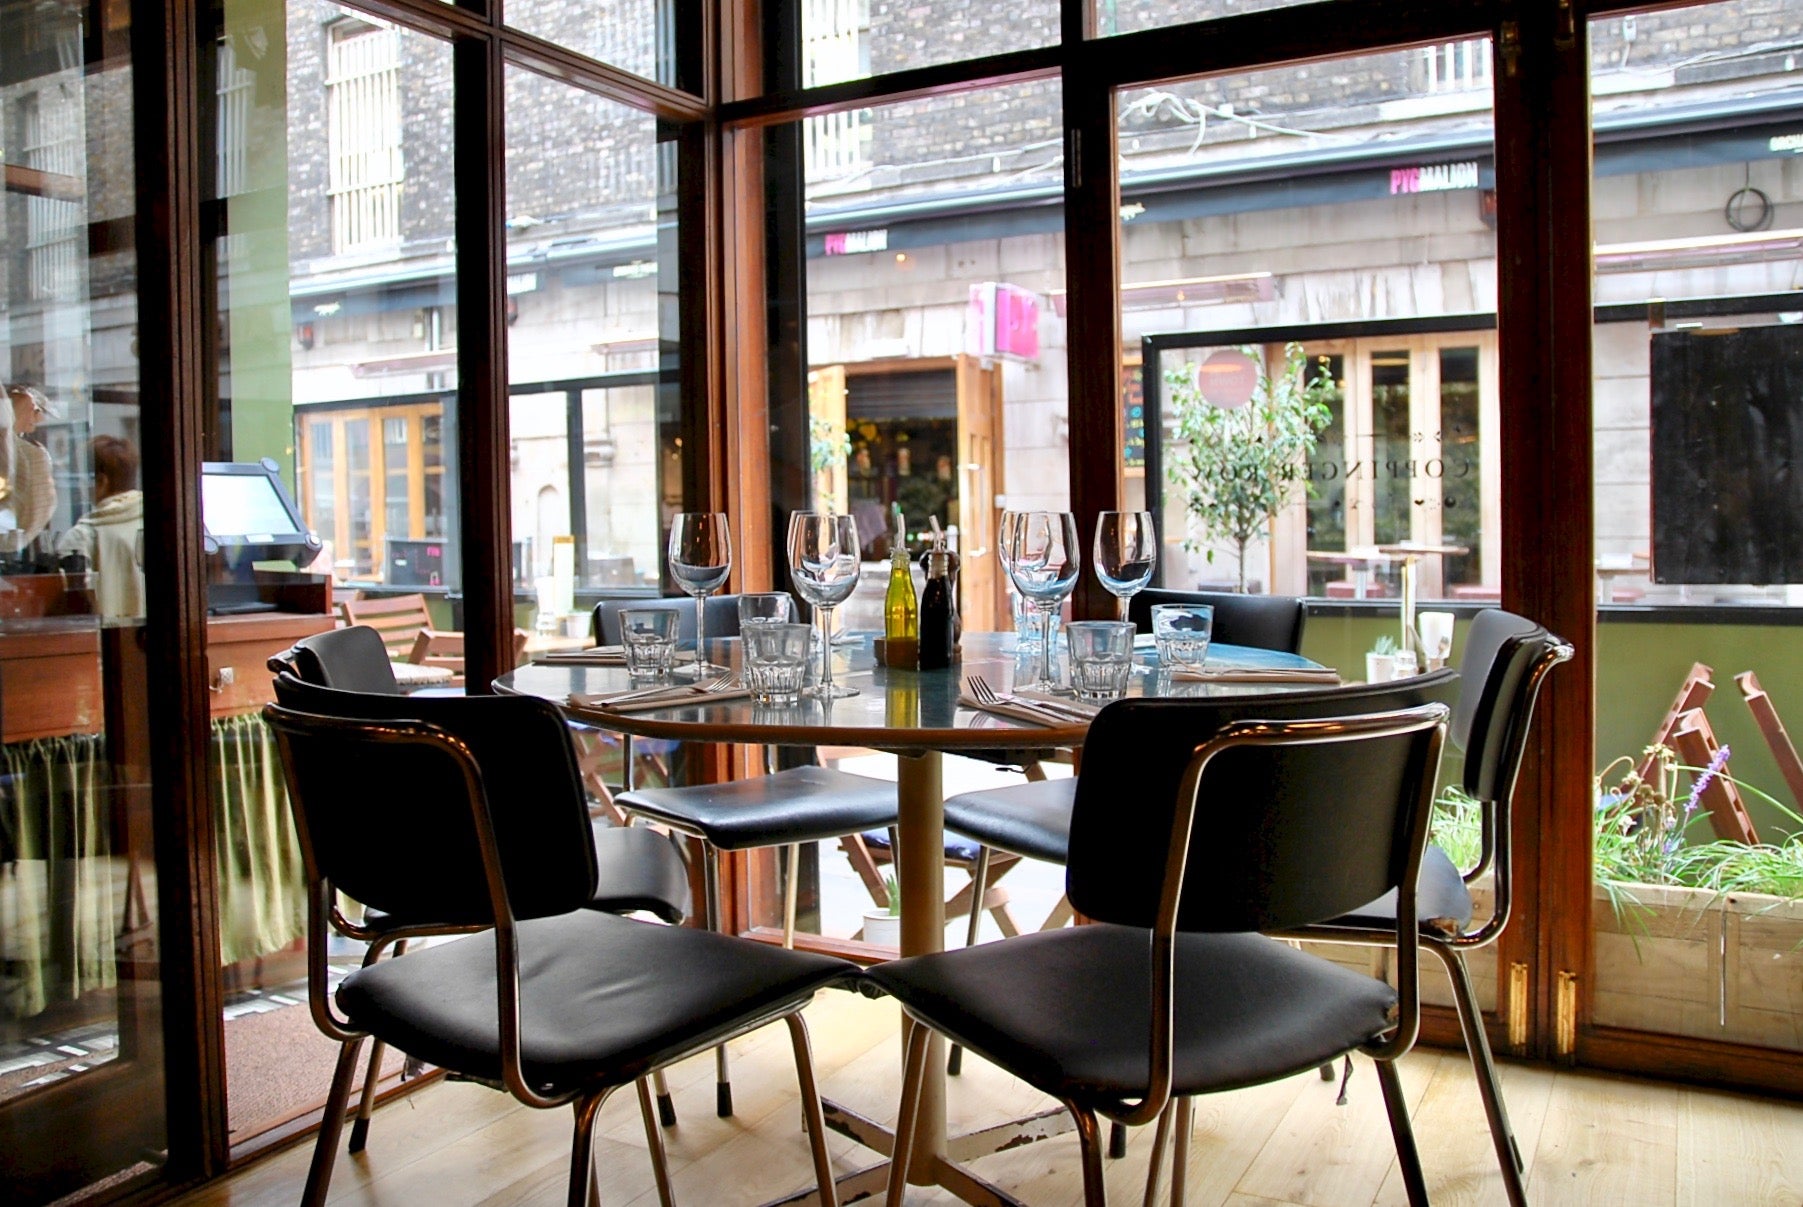 Grab a trendy brunch at Coppinger Row